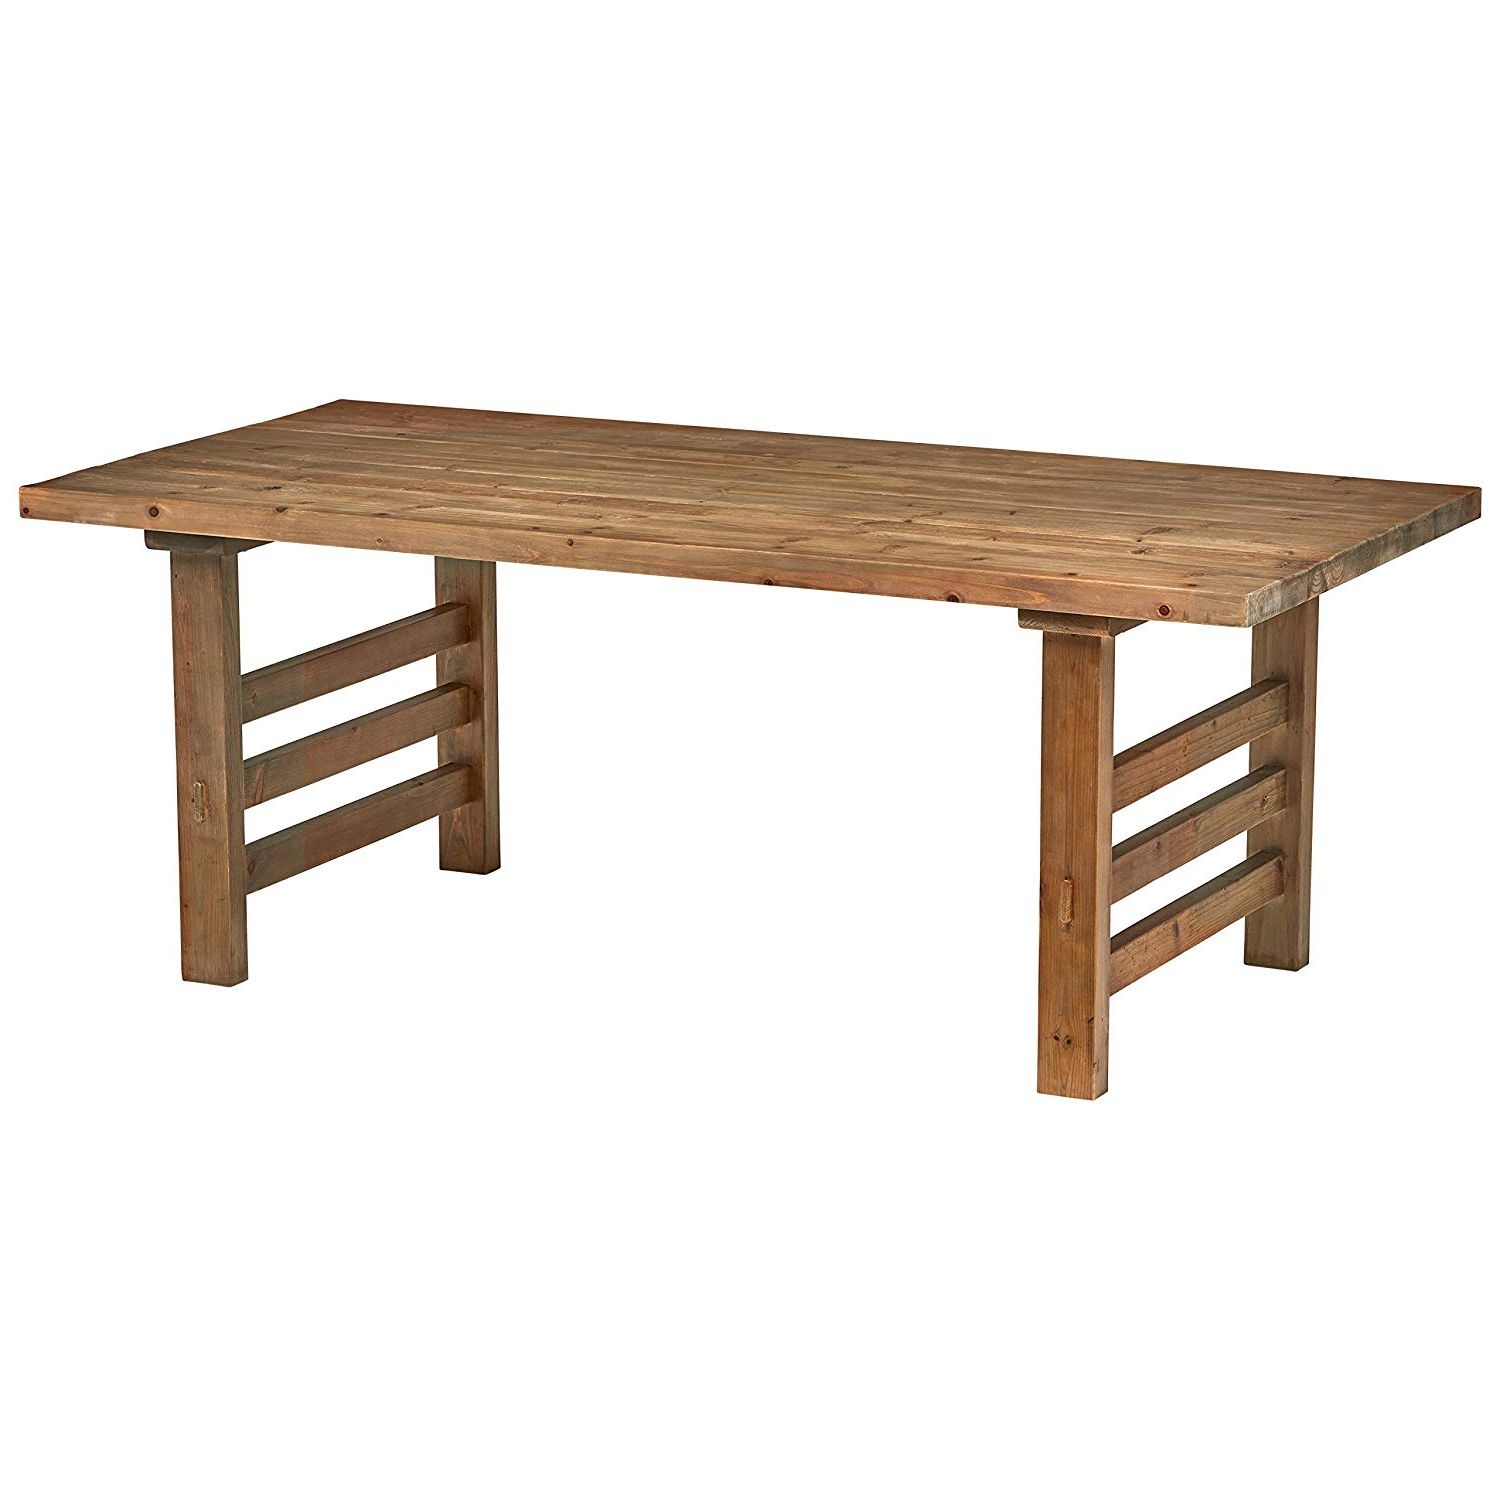 Rustic Pine Small Dining Tables For 2017 Amazon – Stone & Beam Reclaimed Fir Rustic Wood Dining (View 7 of 30)